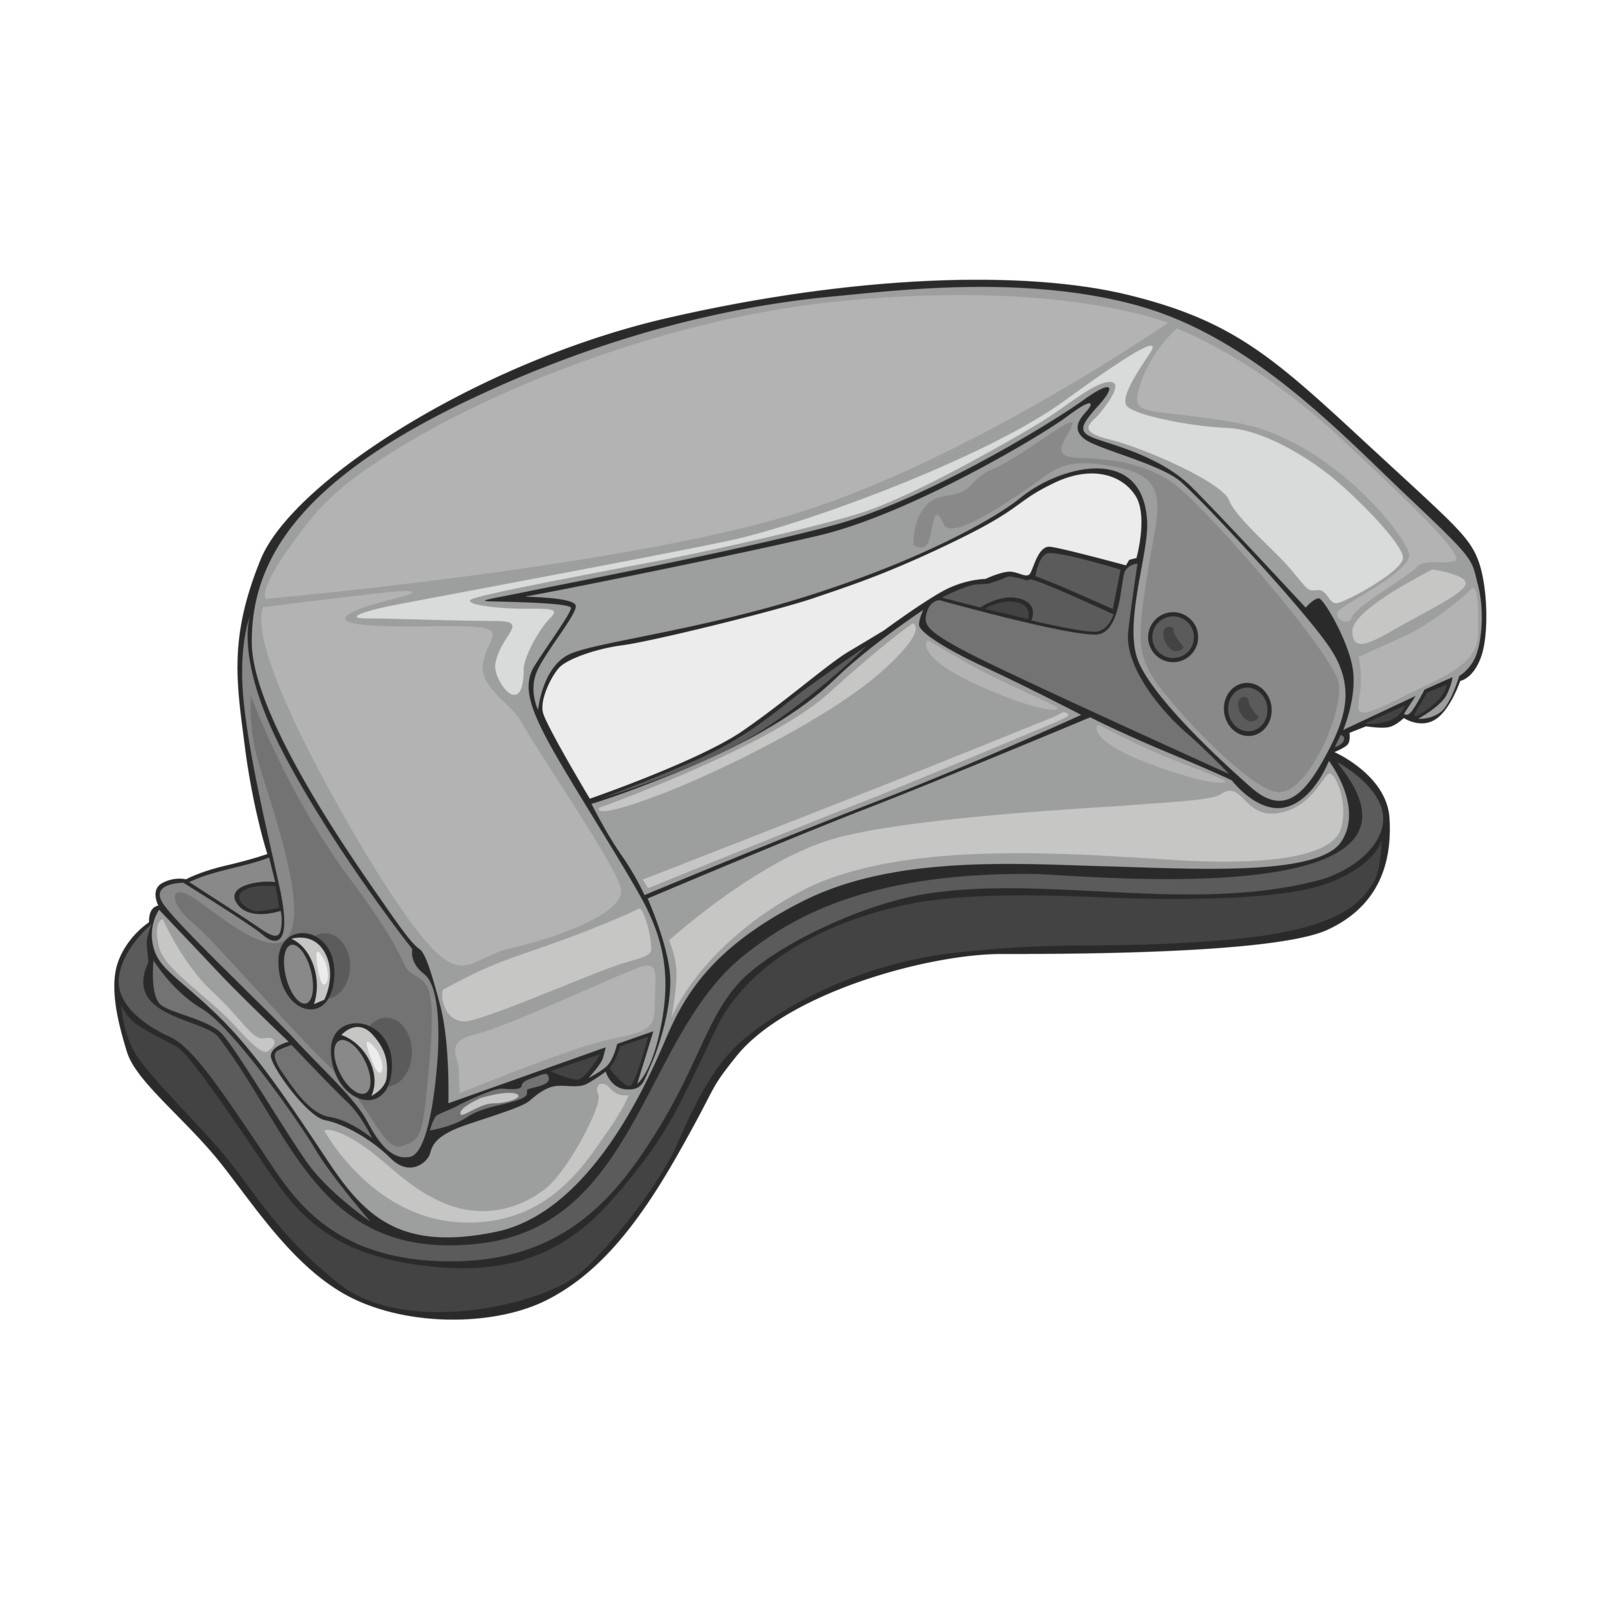 fully editable vector illustration of isolated perforator